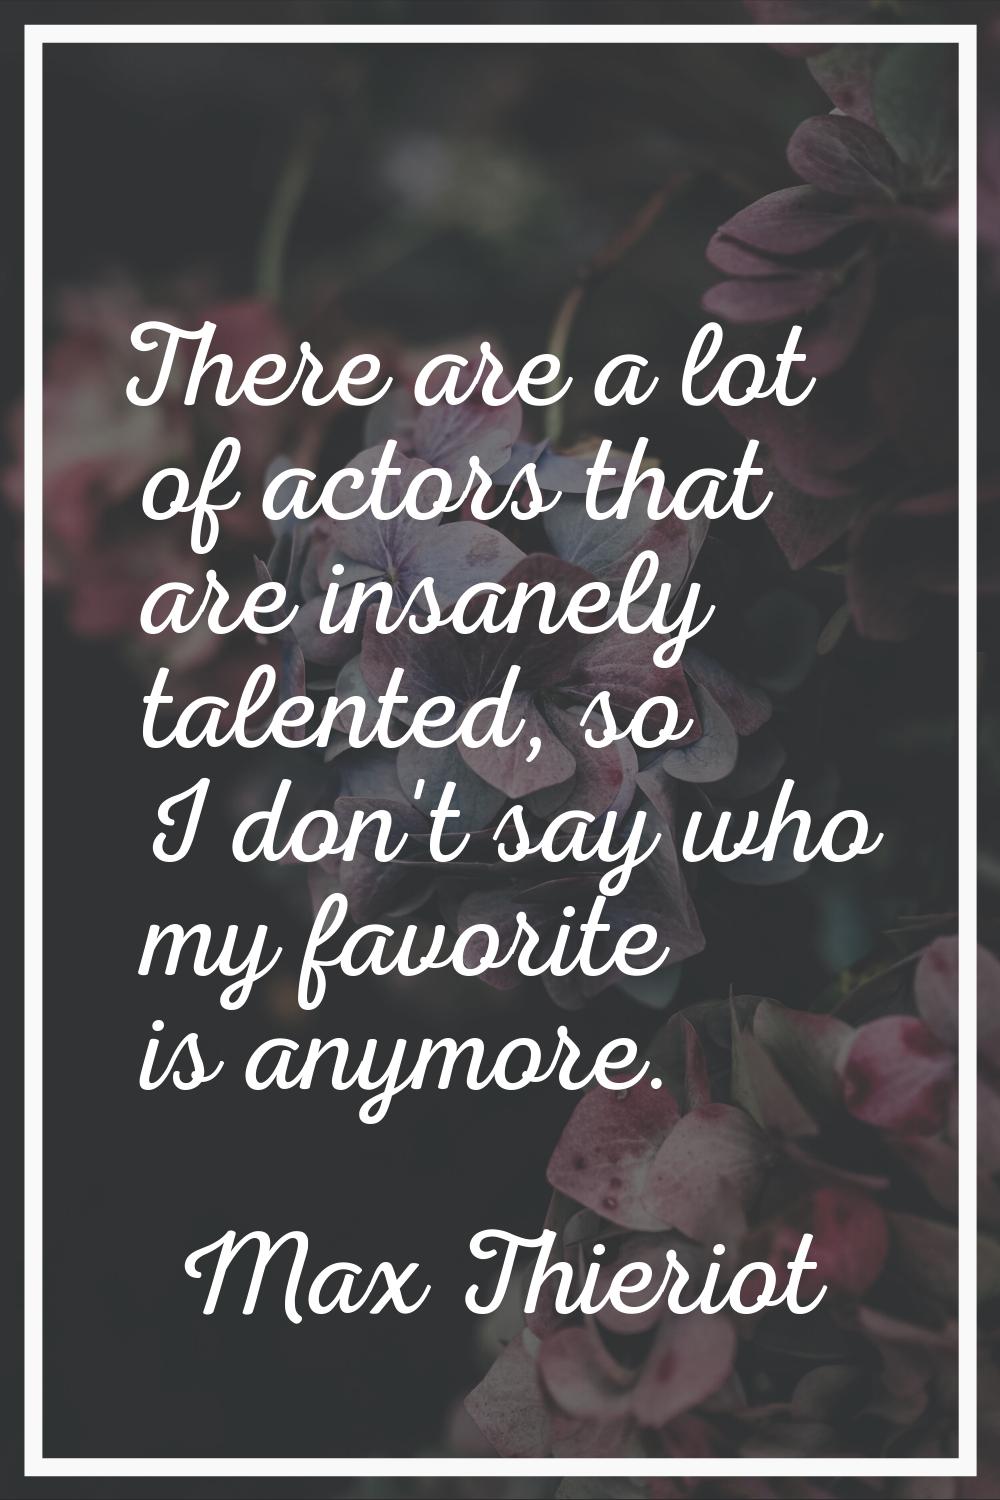 There are a lot of actors that are insanely talented, so I don't say who my favorite is anymore.